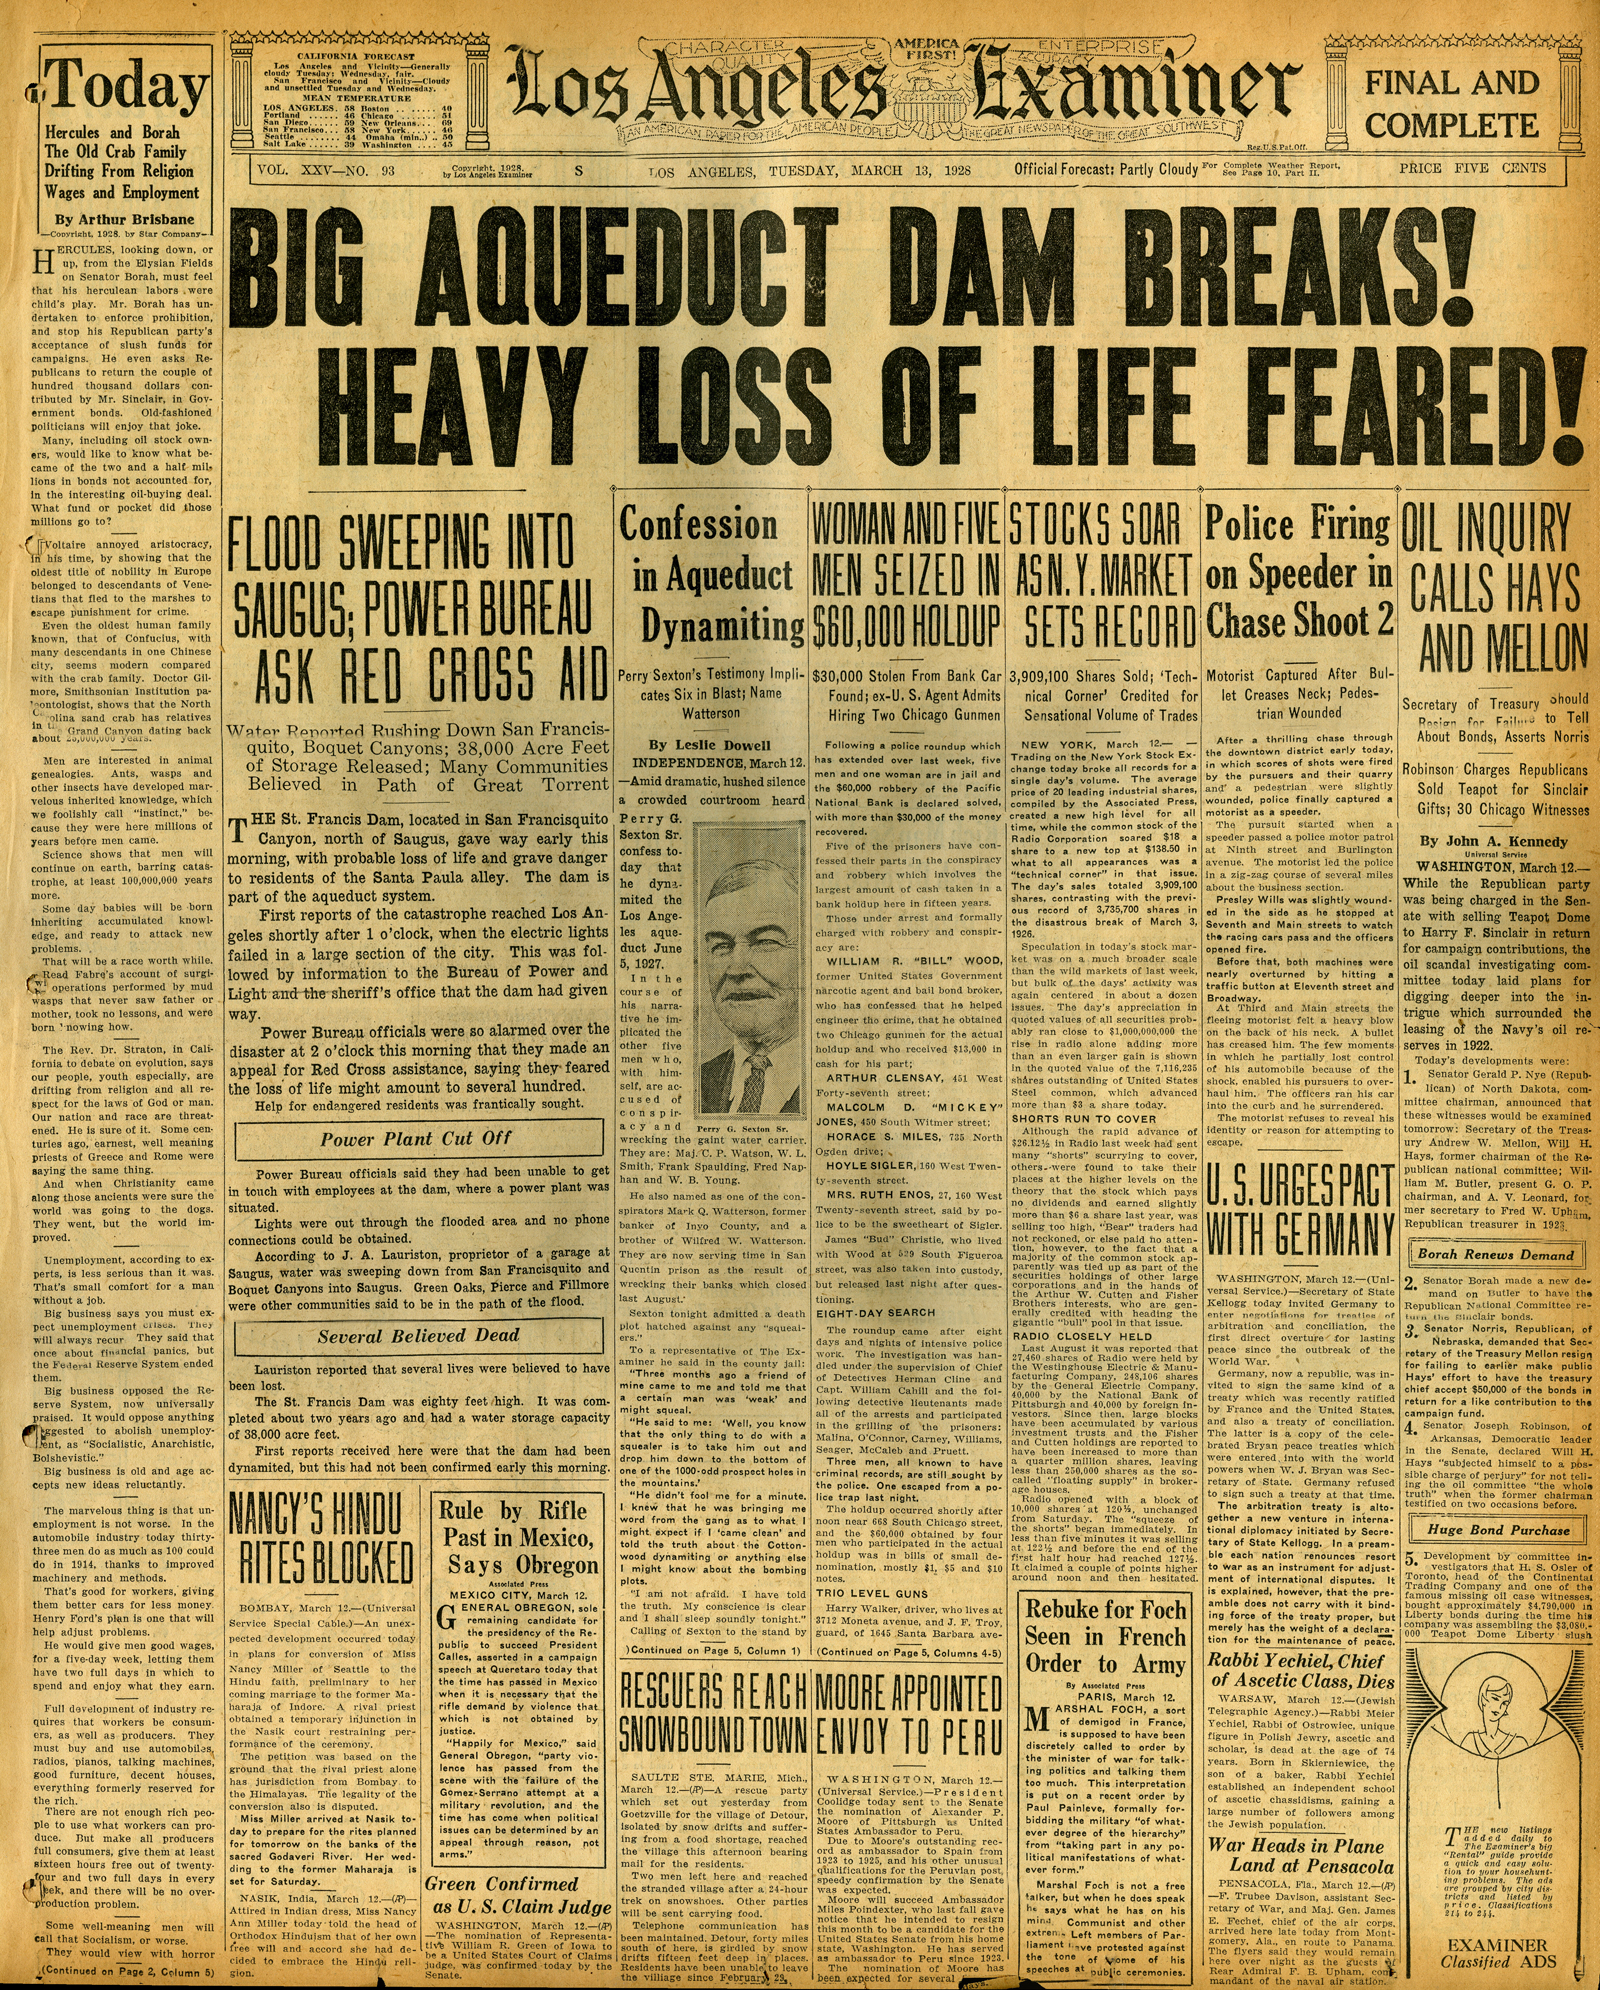 Newspapers of the St. Francis Dam Disaster

LOS ANGELES EXAMINER

Los Angeles, California | Tuesday, March 13, 1928